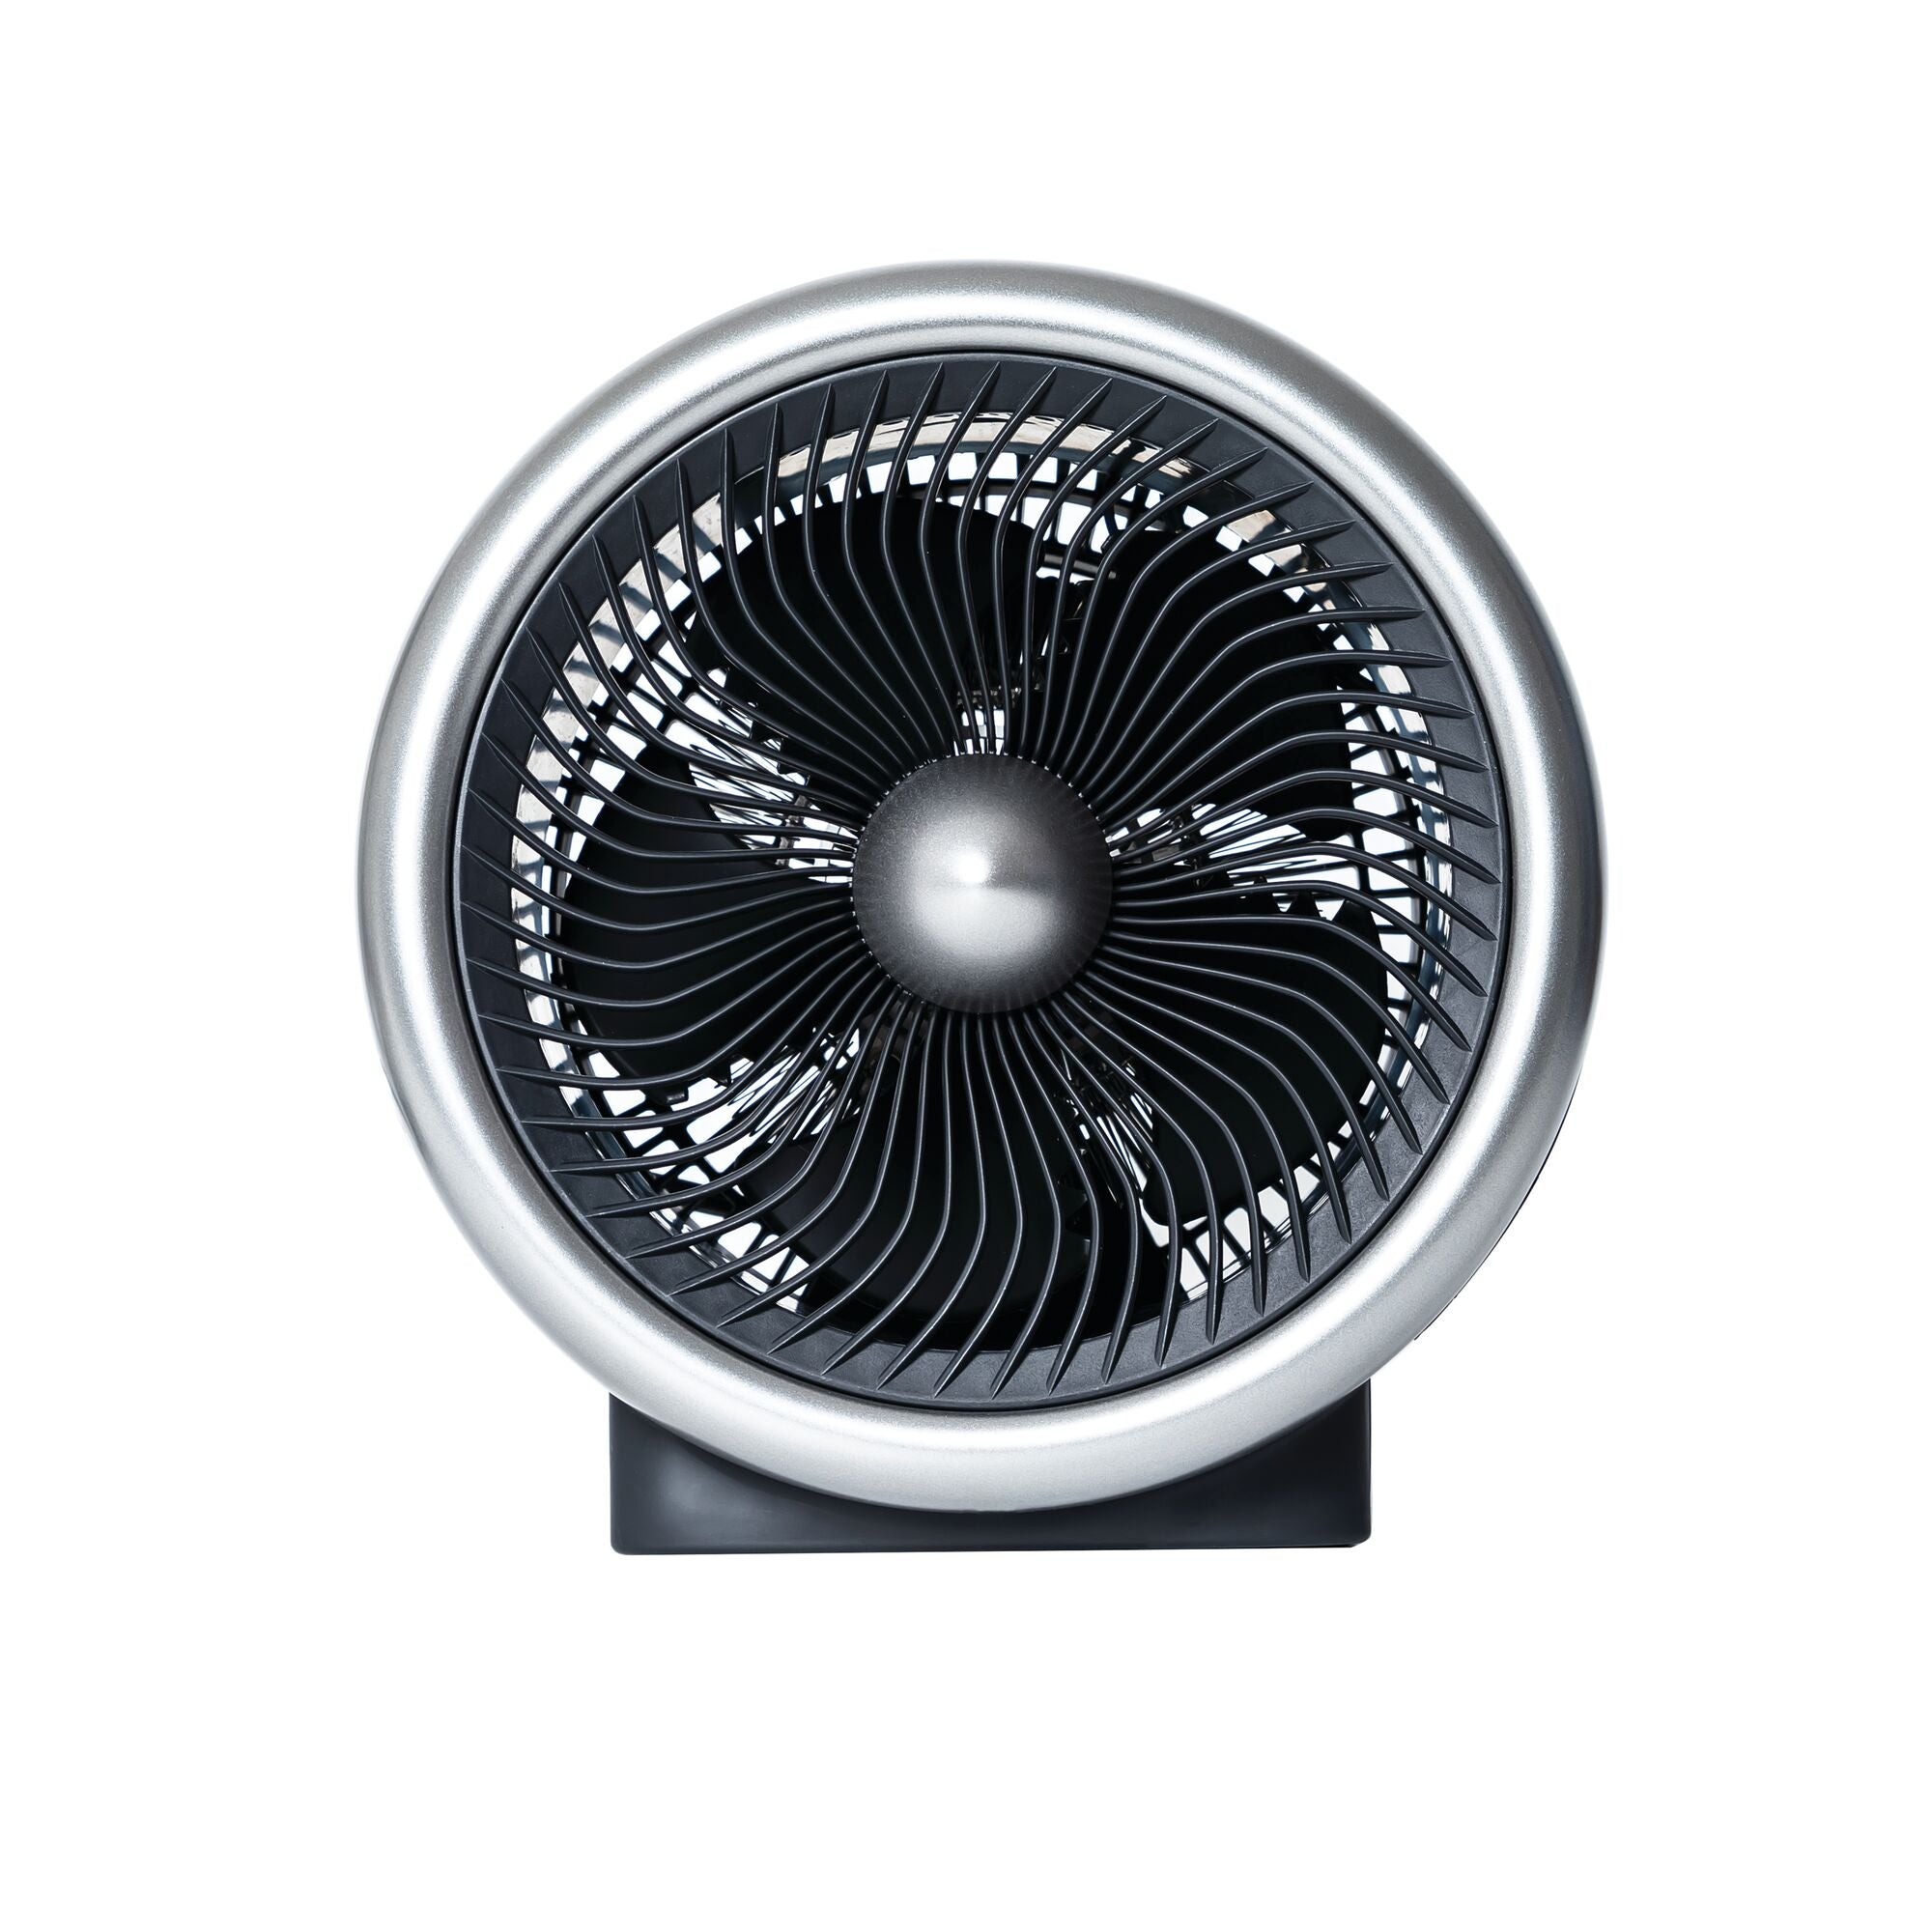 Digital turbo portable heater fan combo 2 in 1 electric personal mini space heater on a wooden table in living area.